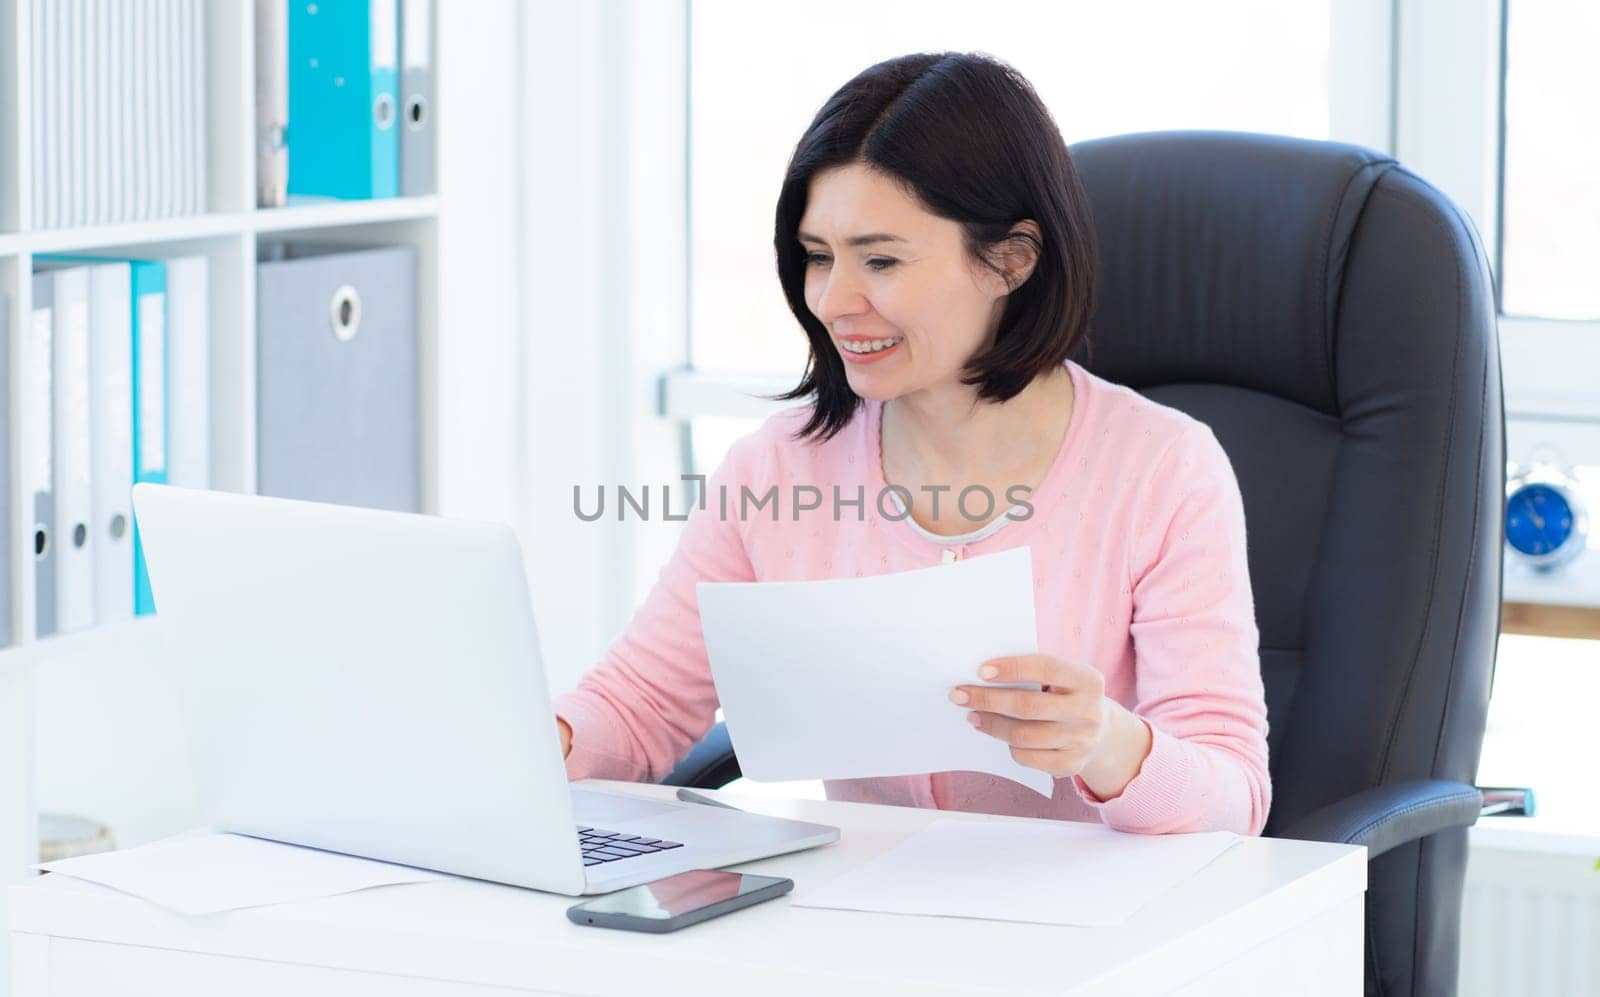 Stylish woman working on laptop in light office